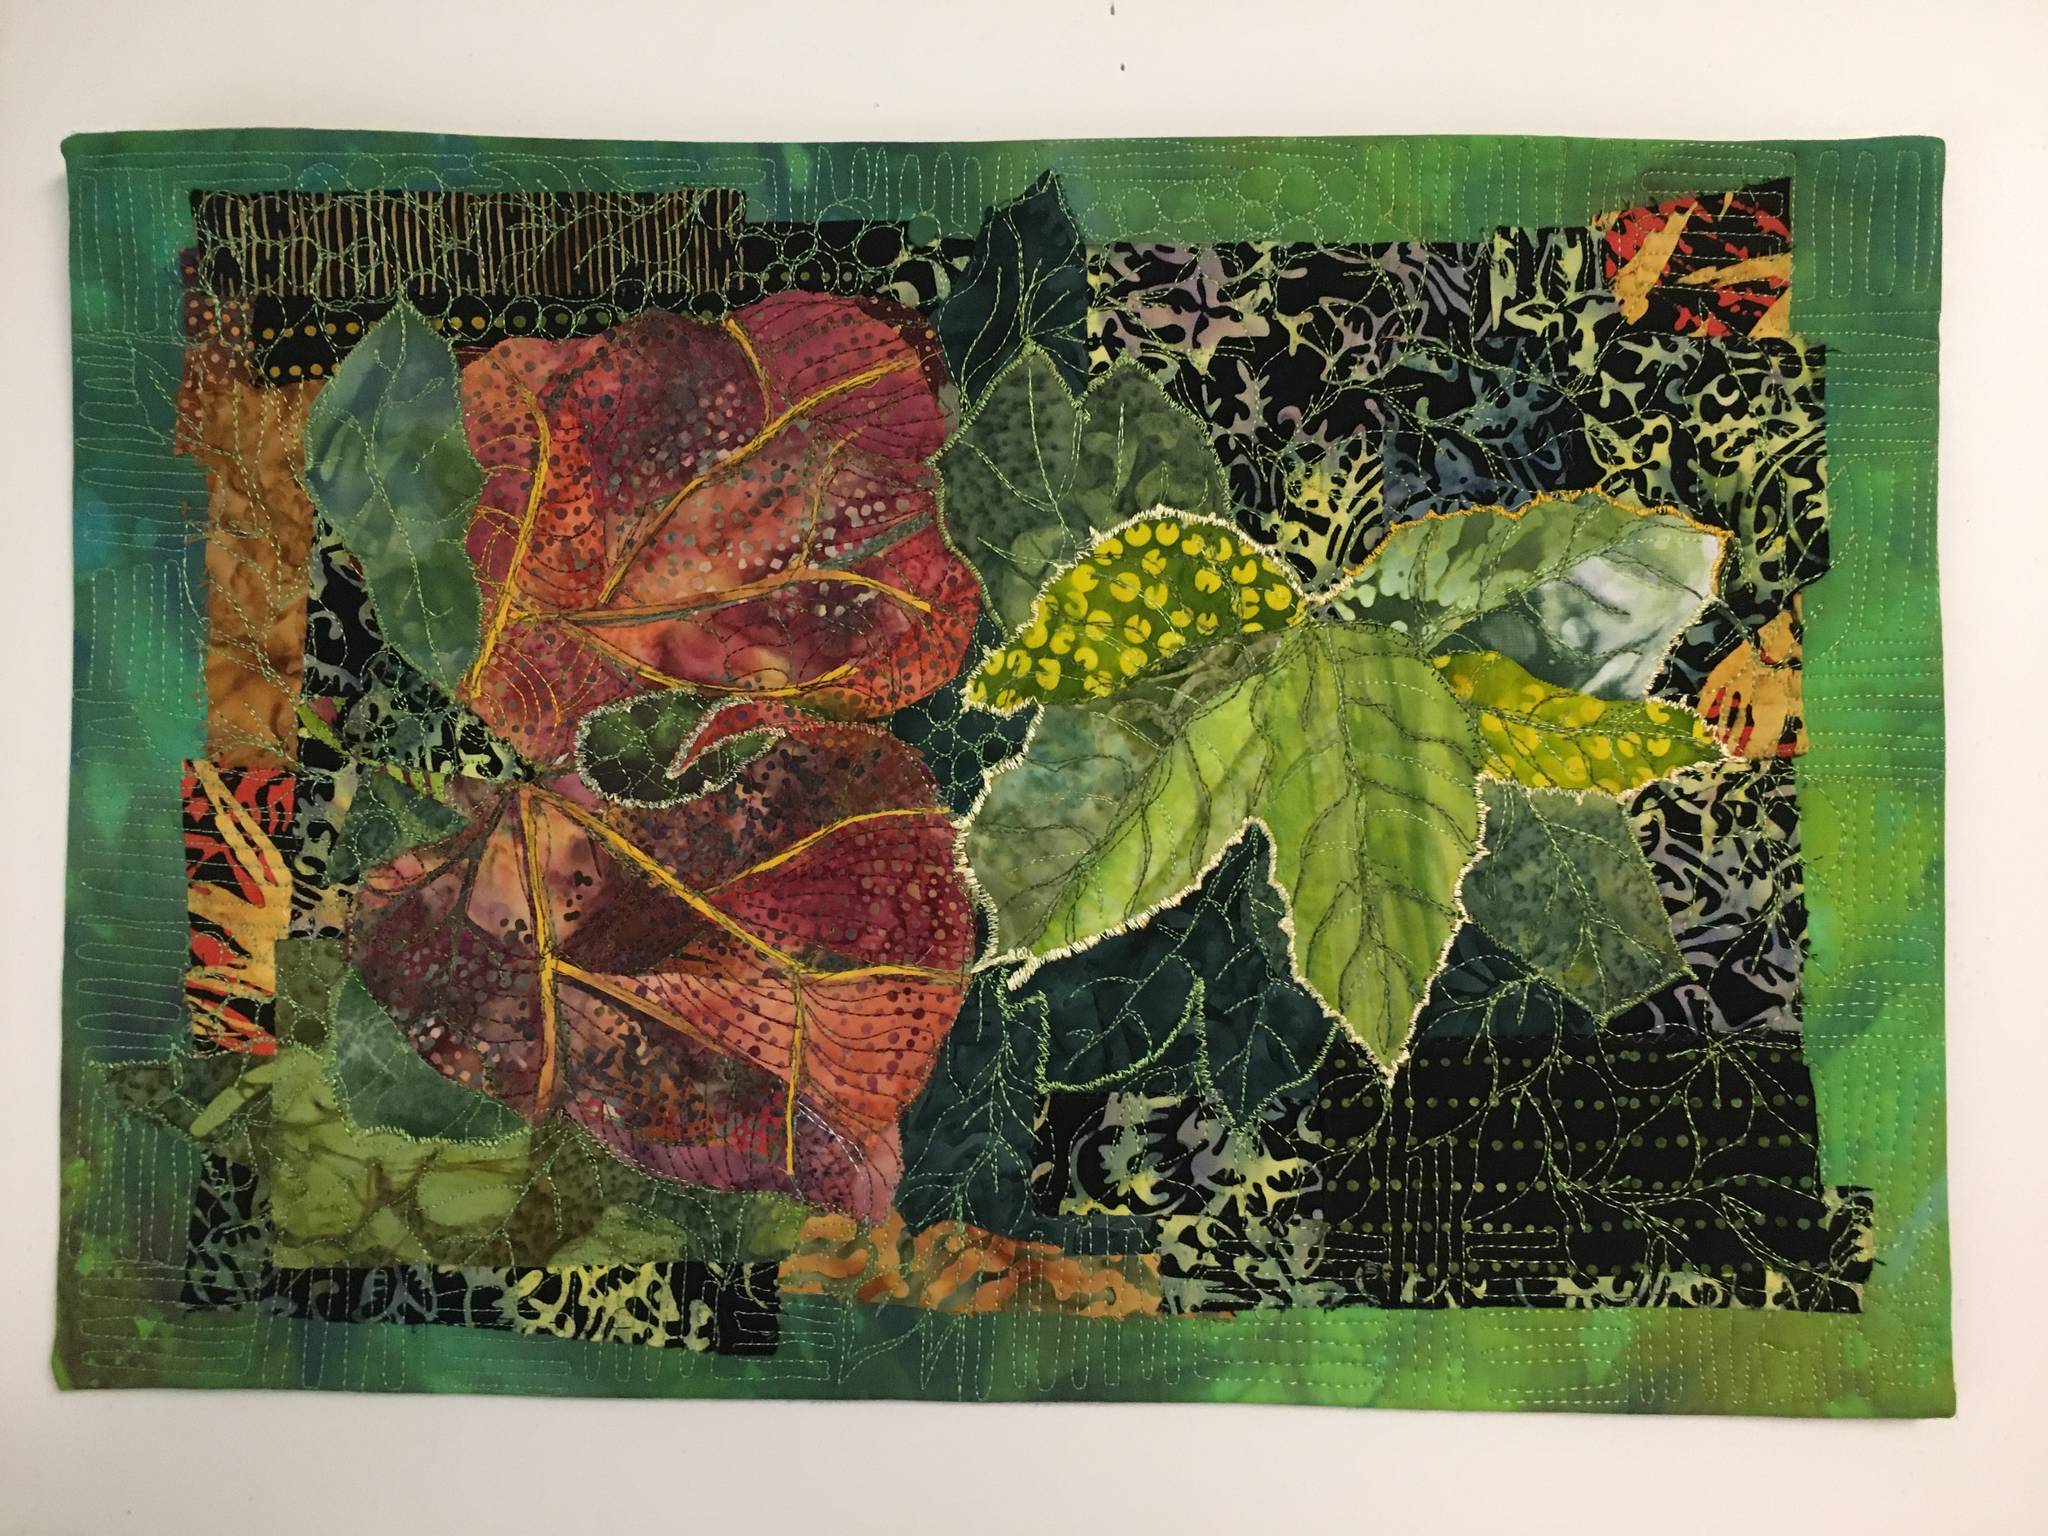 “Reaching for Light,” by Liisa Fagerlund, a member of the North Peninsula chapter of the Surface Design Association, is on display through October at the “Farm. Fresh. Art.” exhibit in Port Townsend. Submitted art